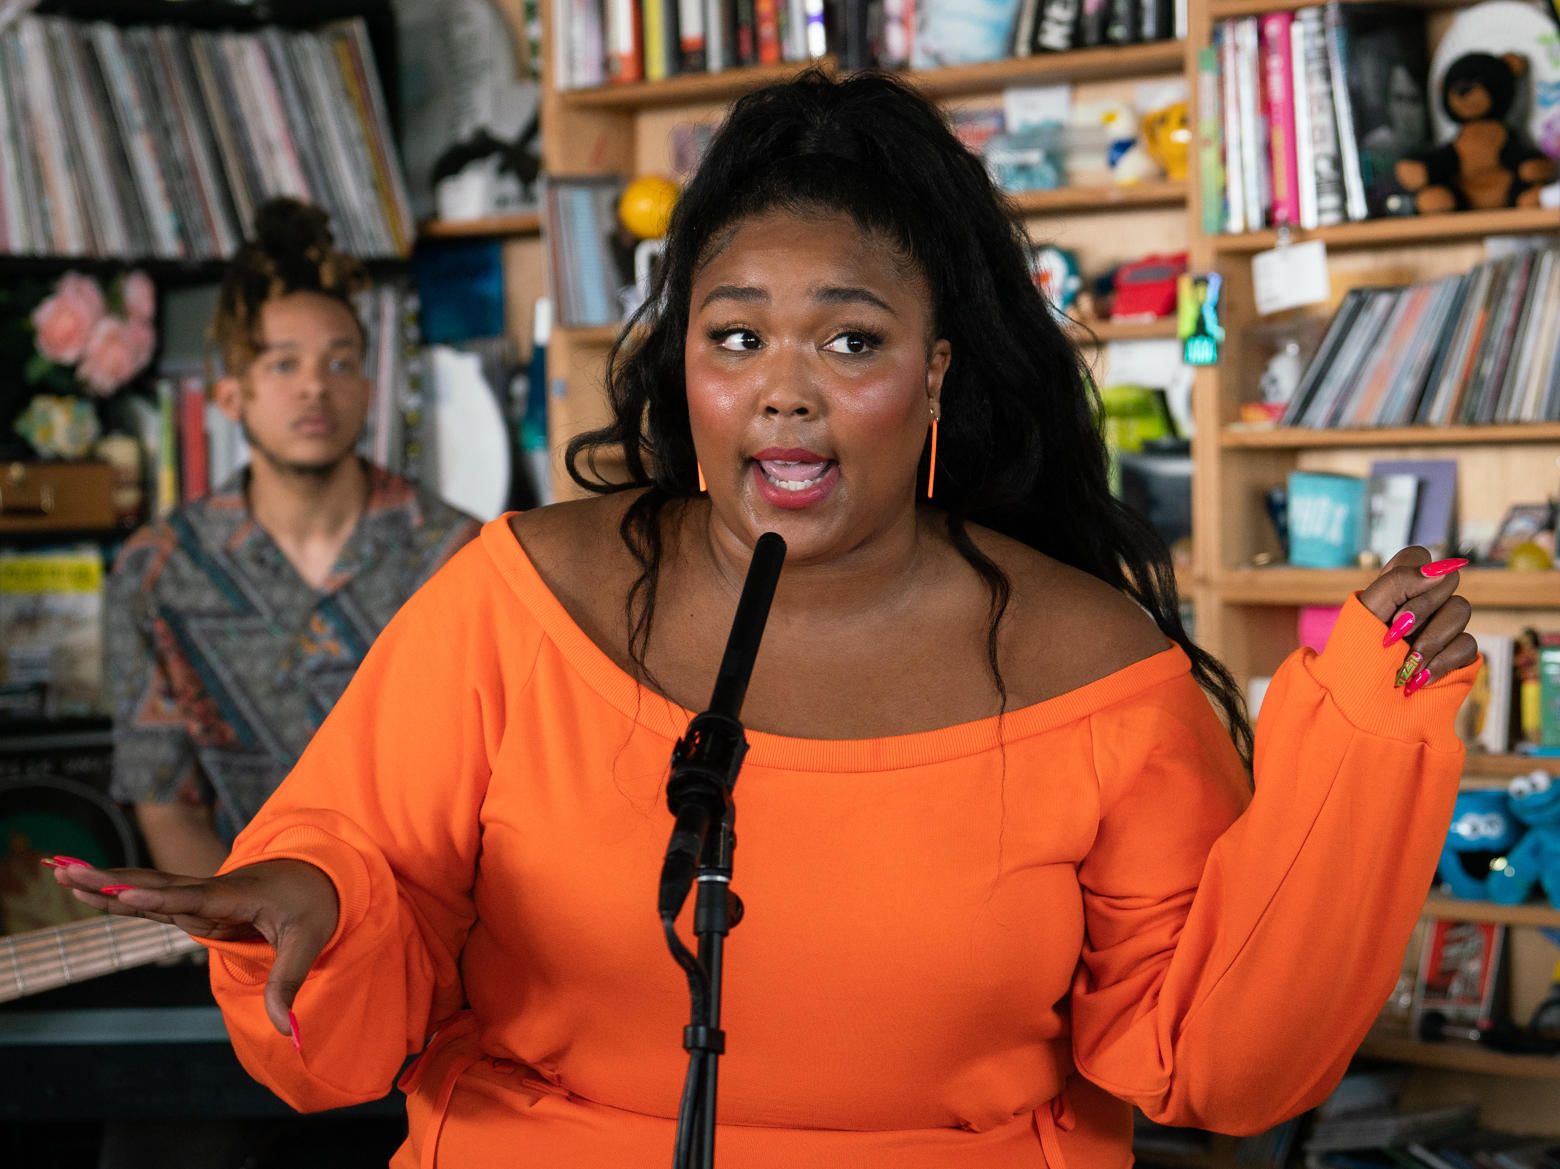 The 5 Most Uplifting Tiny Desk Concerts WJCT NEWS